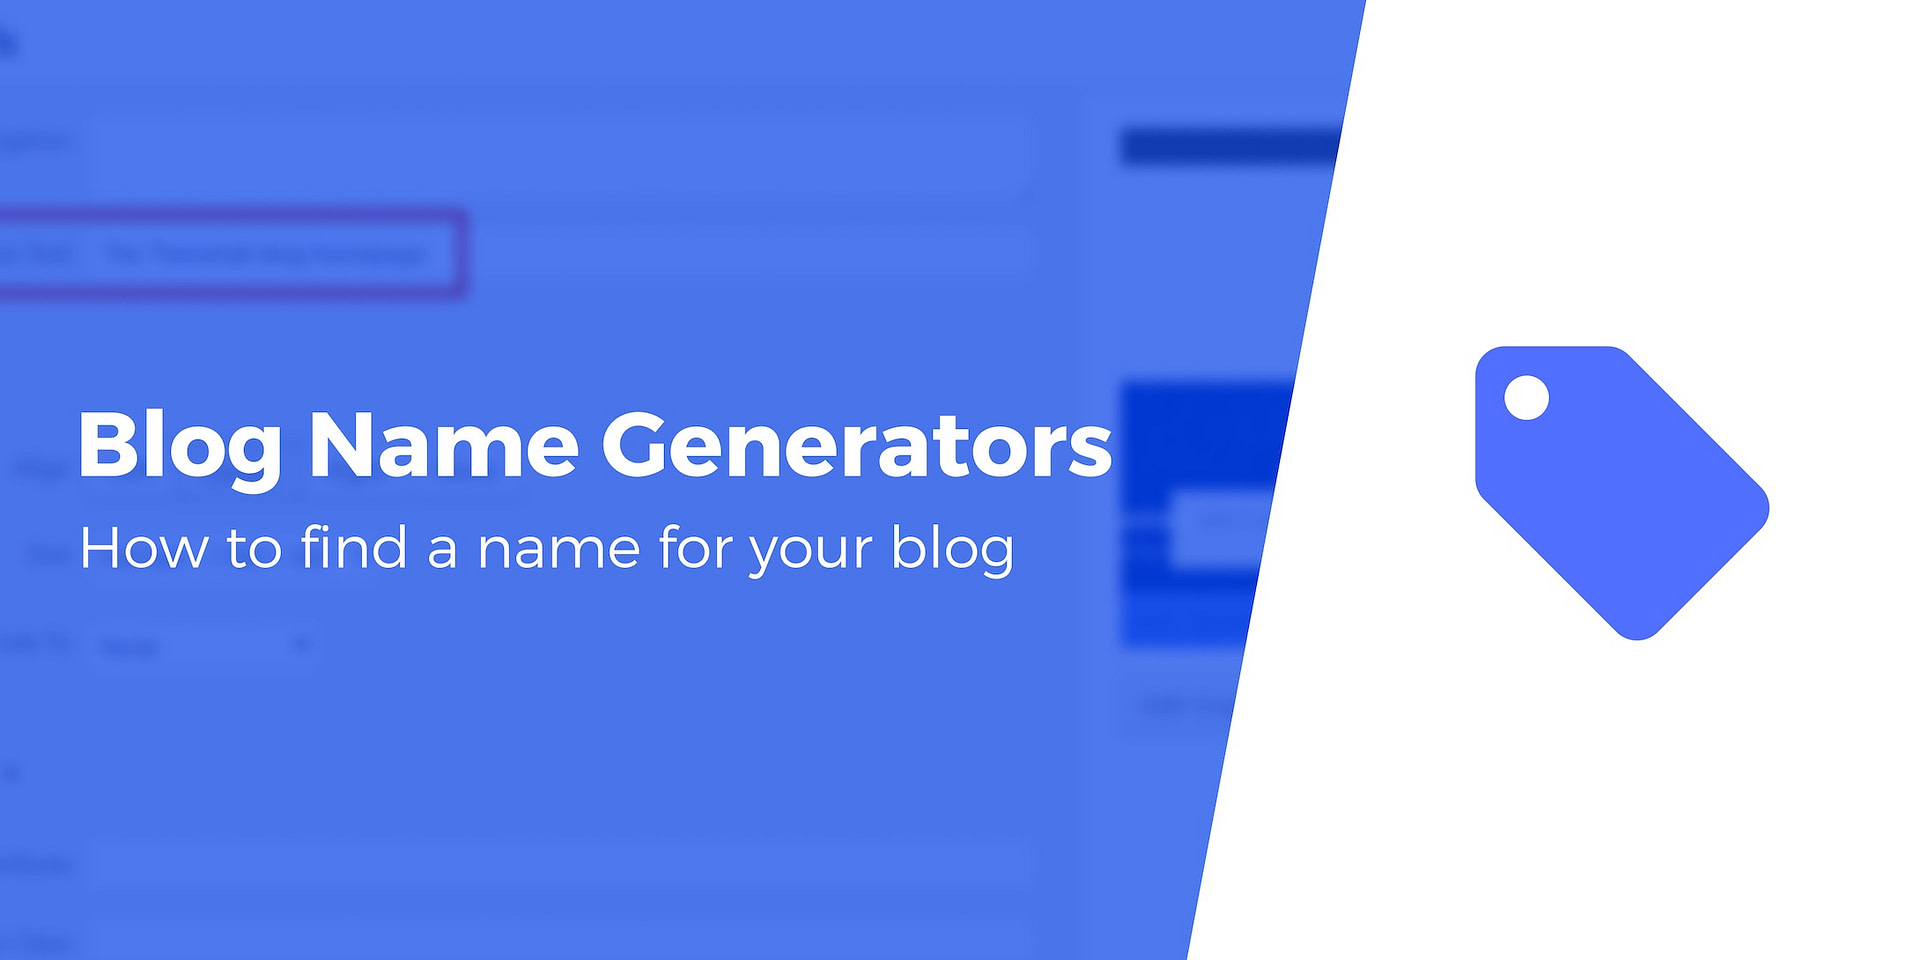 Best Blog Name Generator List: 10+ Tools to Find Blog Name Ideas